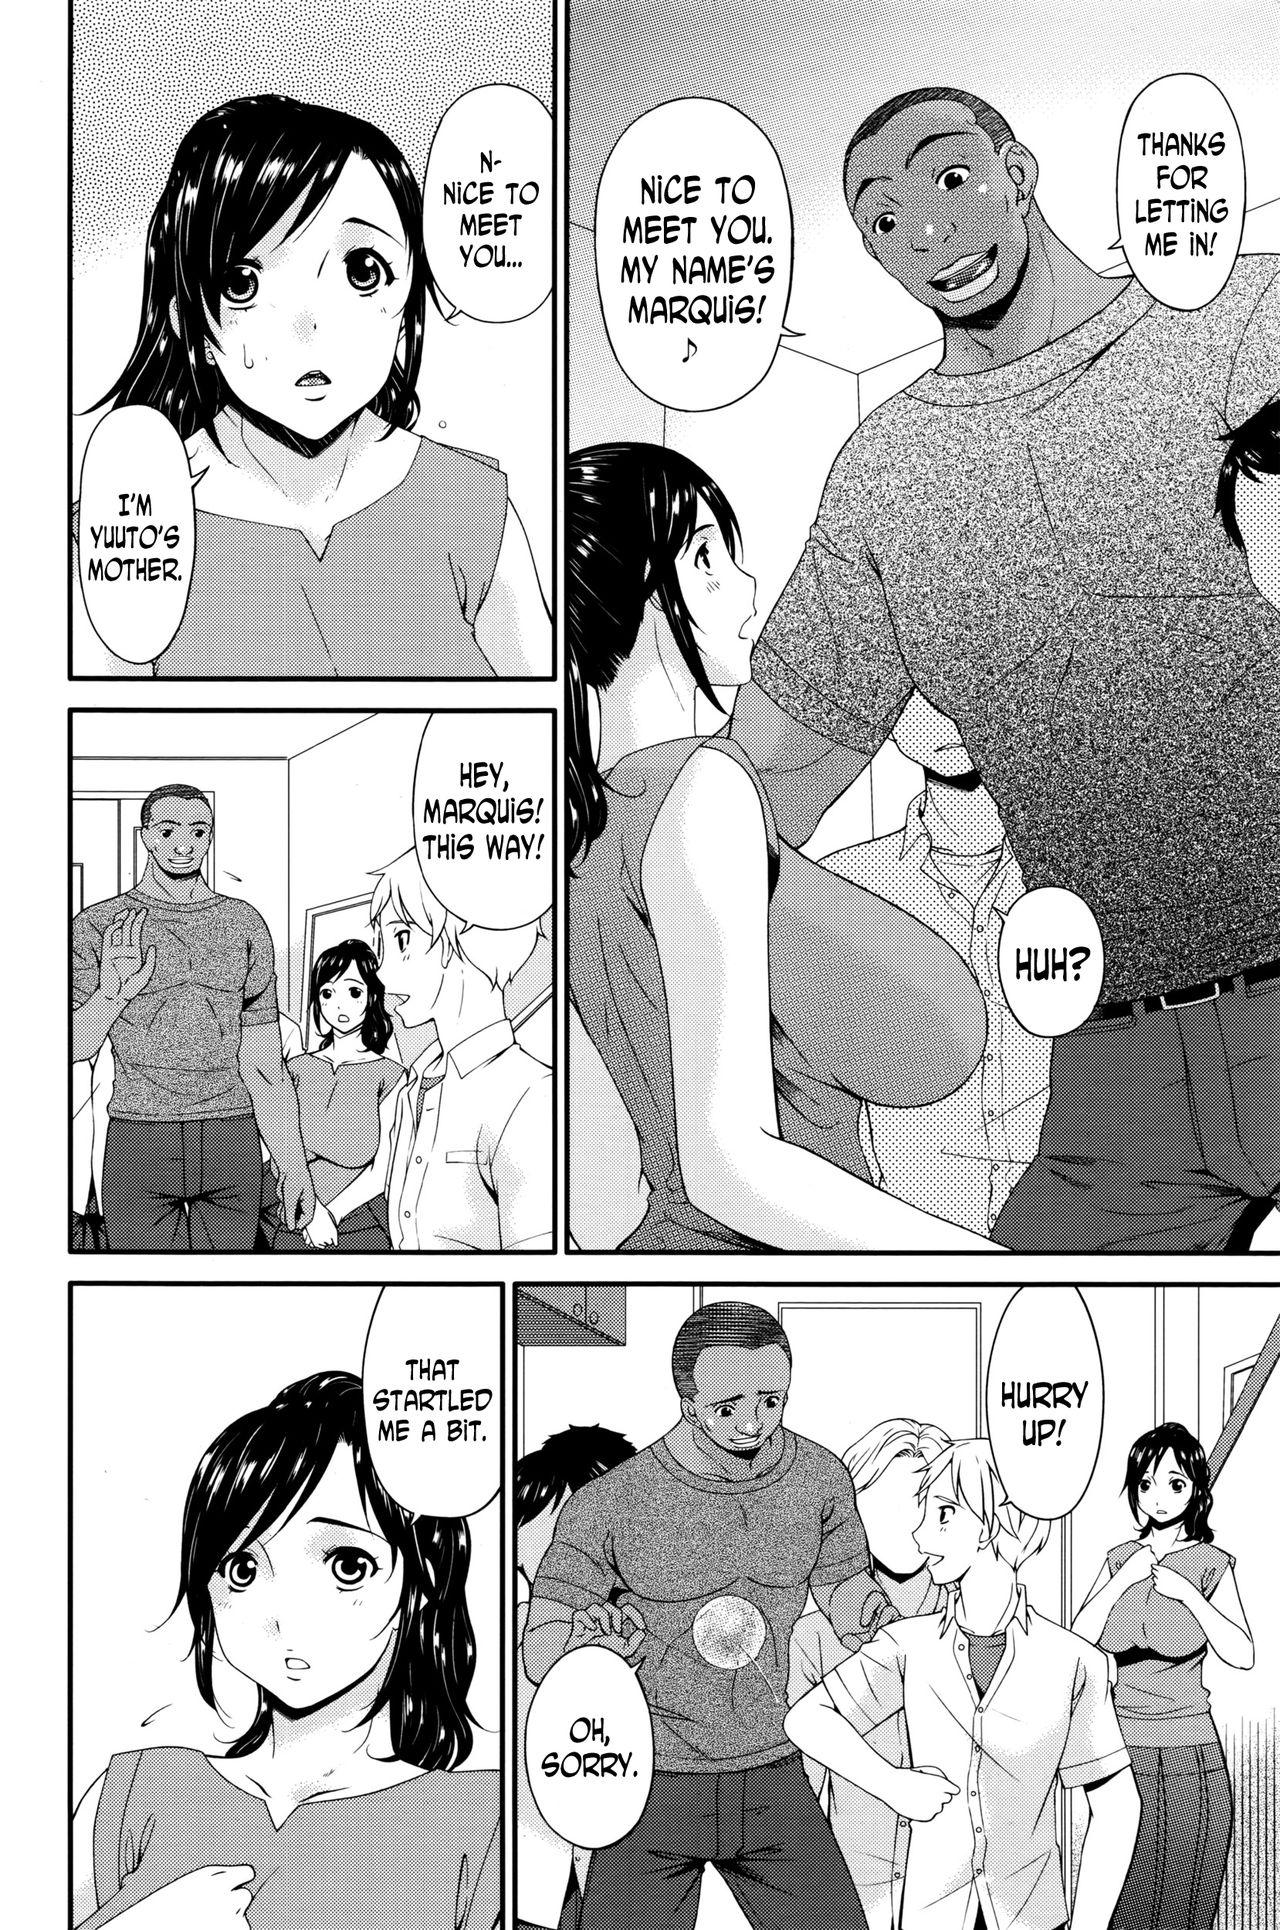 Bush Youbo | Impregnated Mother Ch. 1-13 Blowjob - Page 2